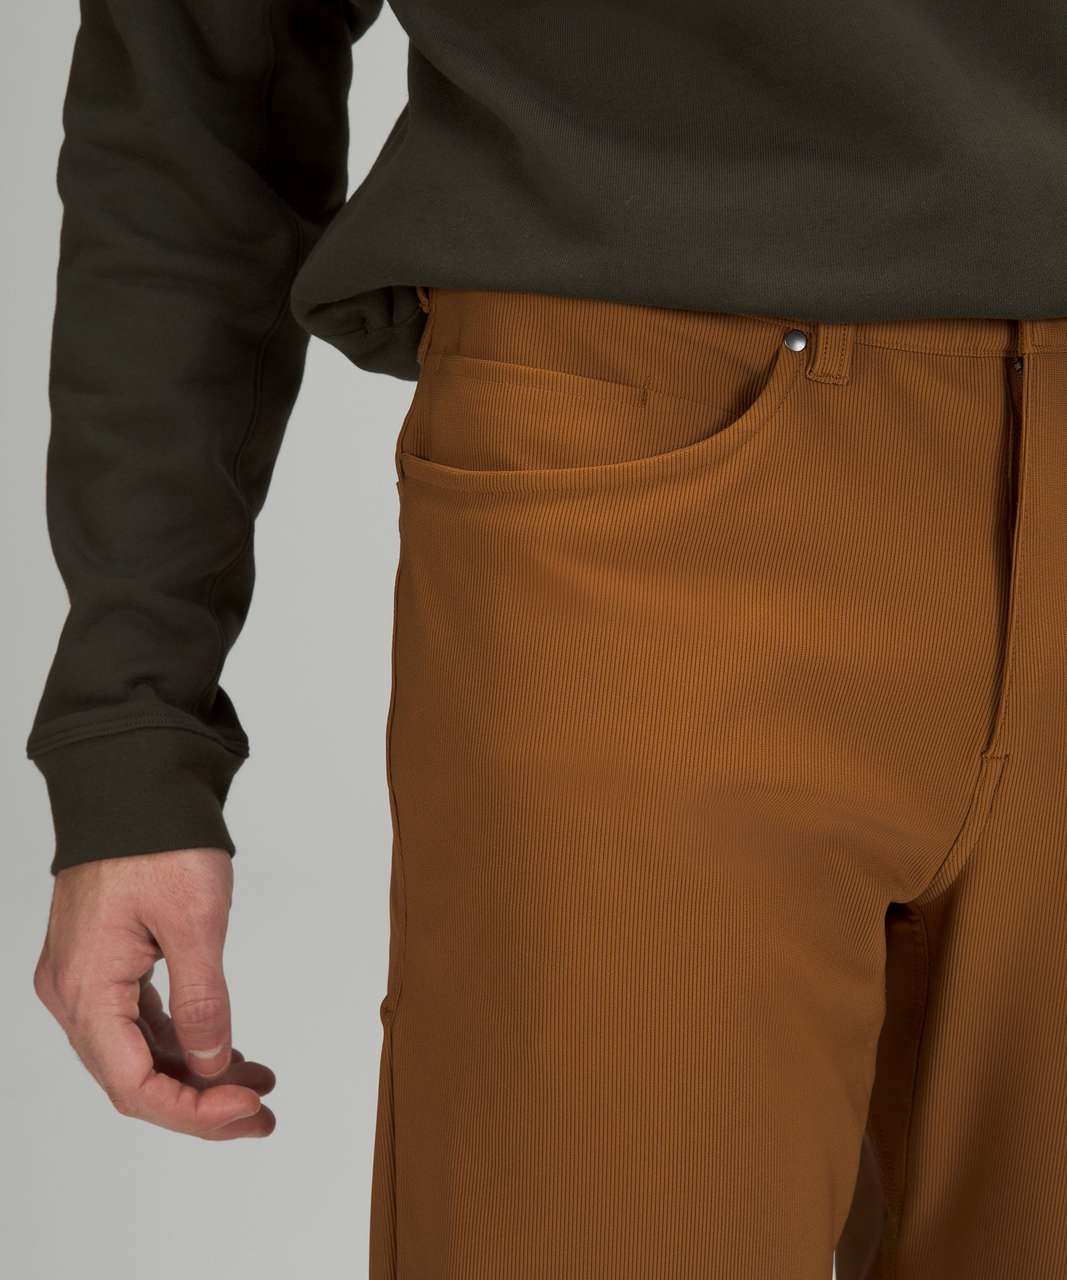 Lululemon ABC Relaxed-Fit Crop Pant *Cord - Copper Brown